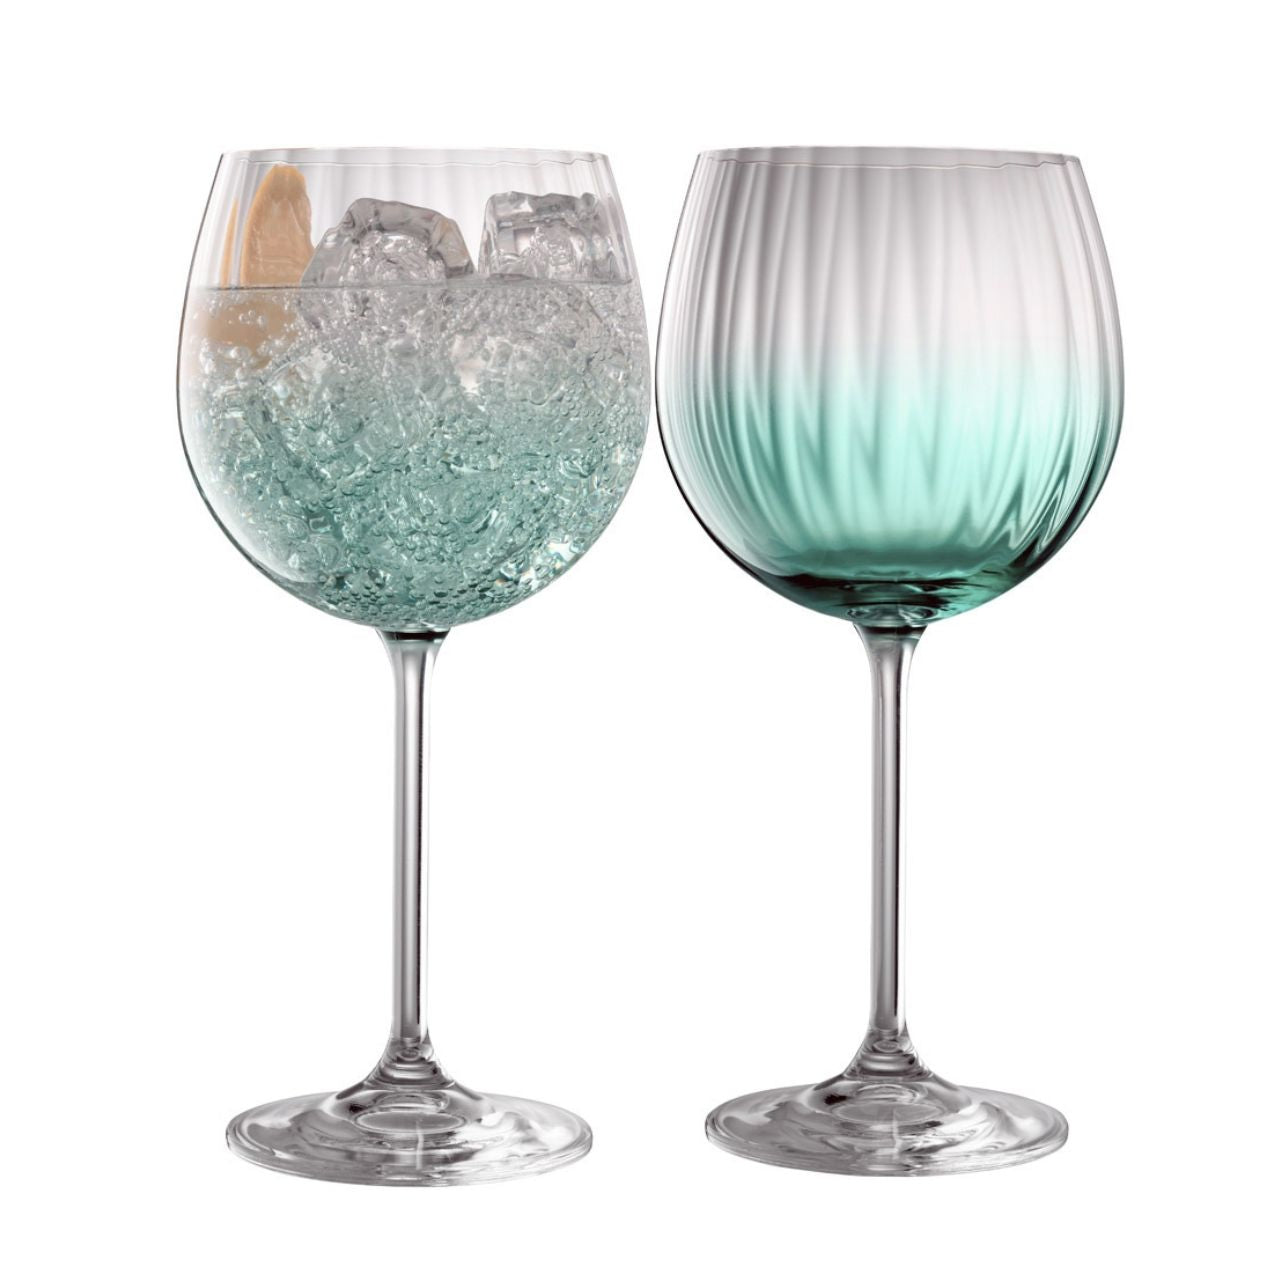 Galway Crystal Erne Gin & Tonic Pair Aqua  Aqua colour Gin and Tonic glasses in the Erne suite. Beautiful large balloon gin glasses with elegant lines design in an Aqua colour. The glass has been designed to add a splash of colour and light design to a stunning gin glass.